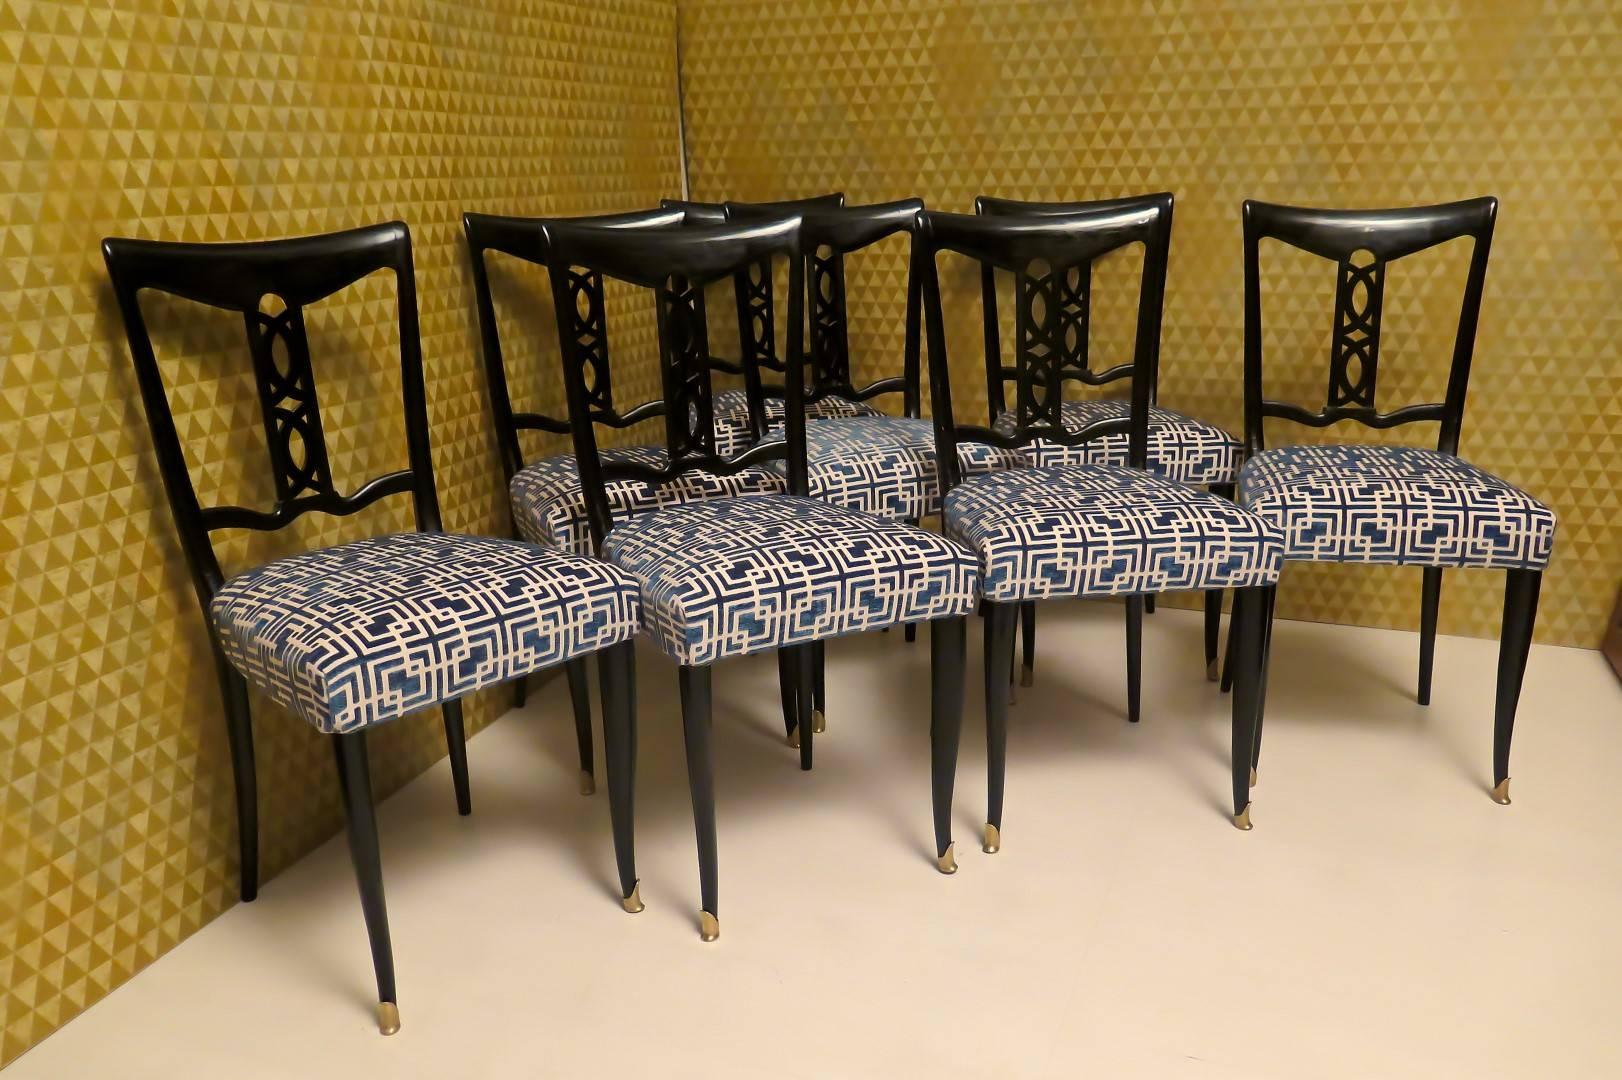 Eight chairs in the style of Ico Parisi, possibly made by Dassi, circa 1955. Very beautiful these eight chairs, all black lacquer. Saber legs, at the bottom of the legs the feet are made of brass. Covered with a velvet blue with white geometric